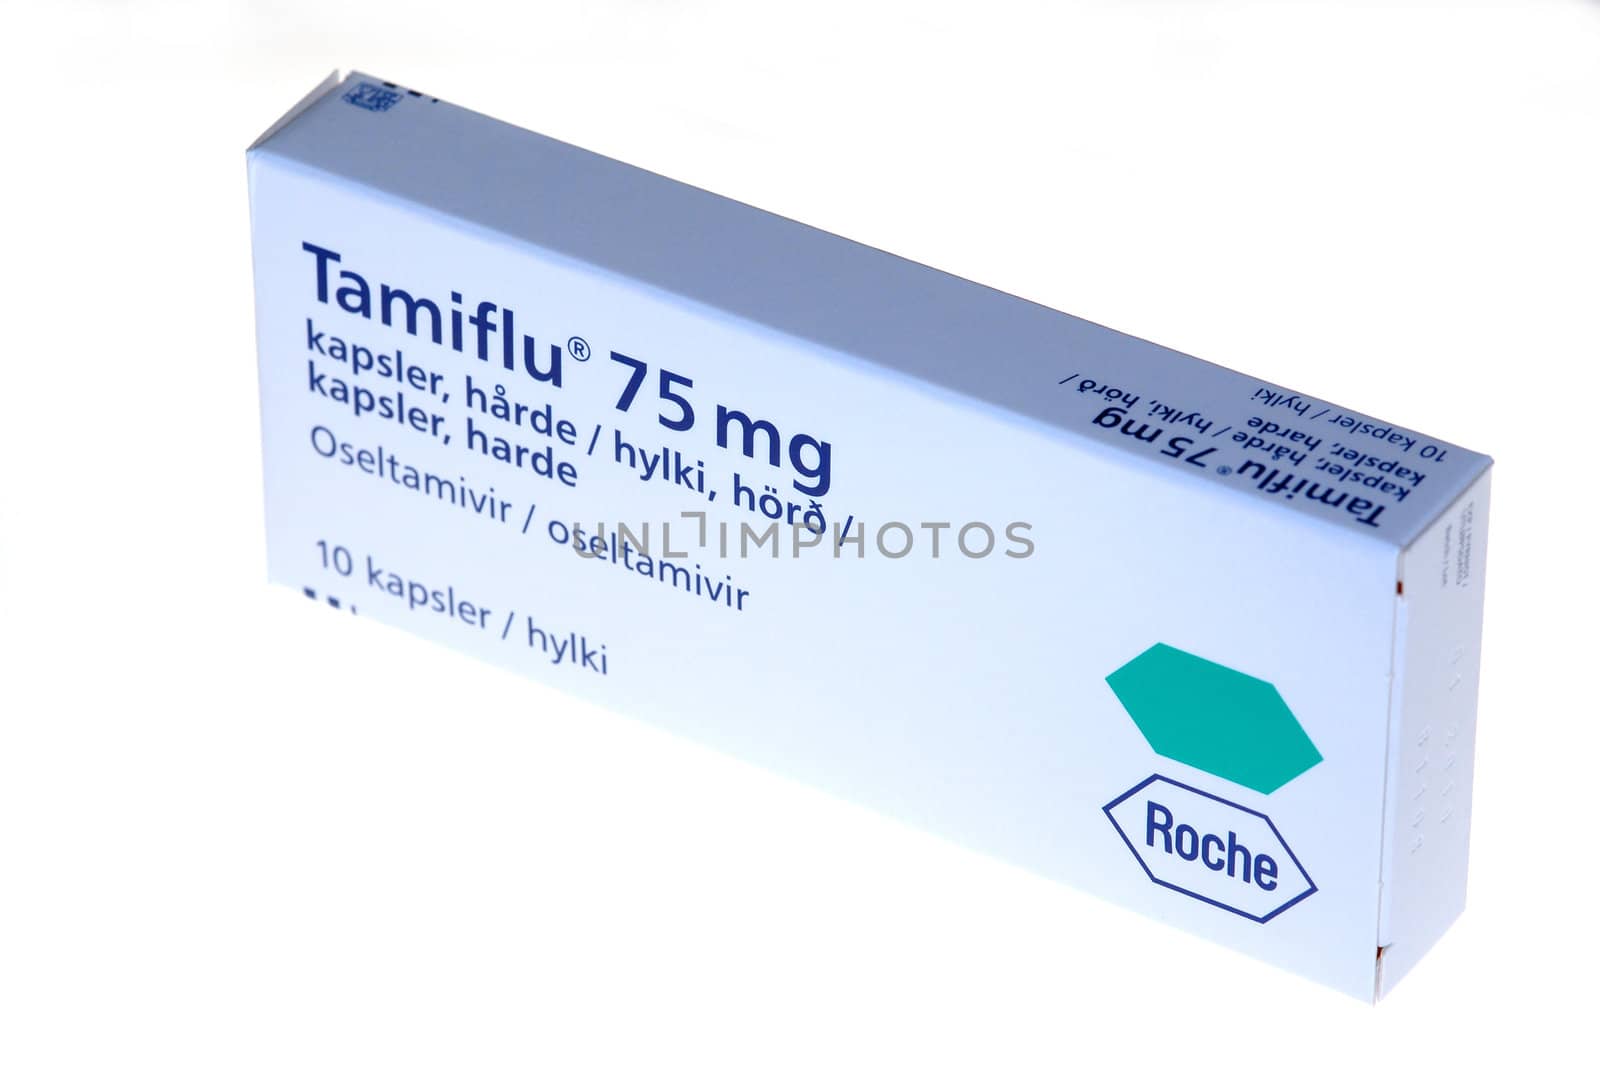 Tamiflu 75mg from Roche.
Selectiv focus.
